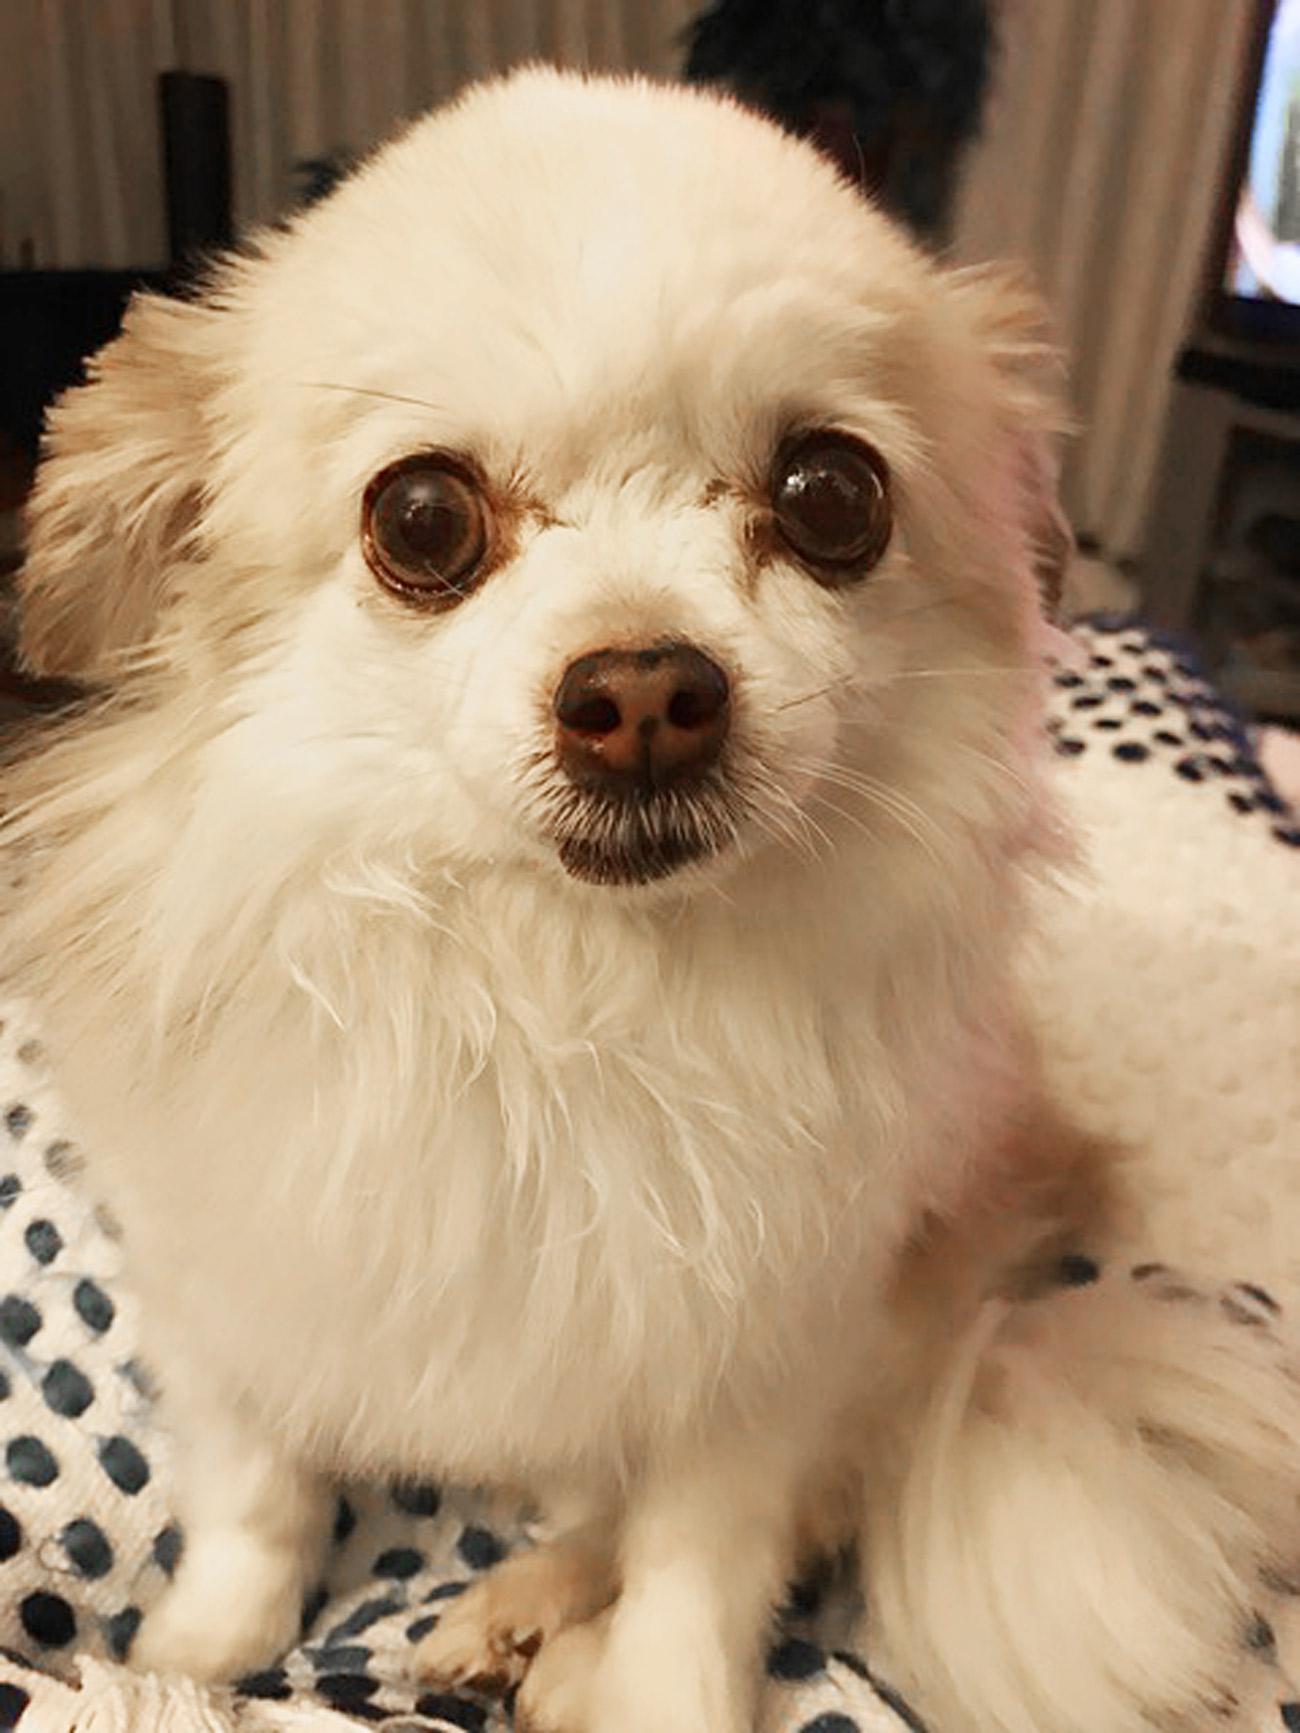 Dear Readers, this is my daughter, Mallory’s, long-haired Chihuahua named Duffy. He keeps me company while she is away at college. — Stephanie, Augusta, Maine